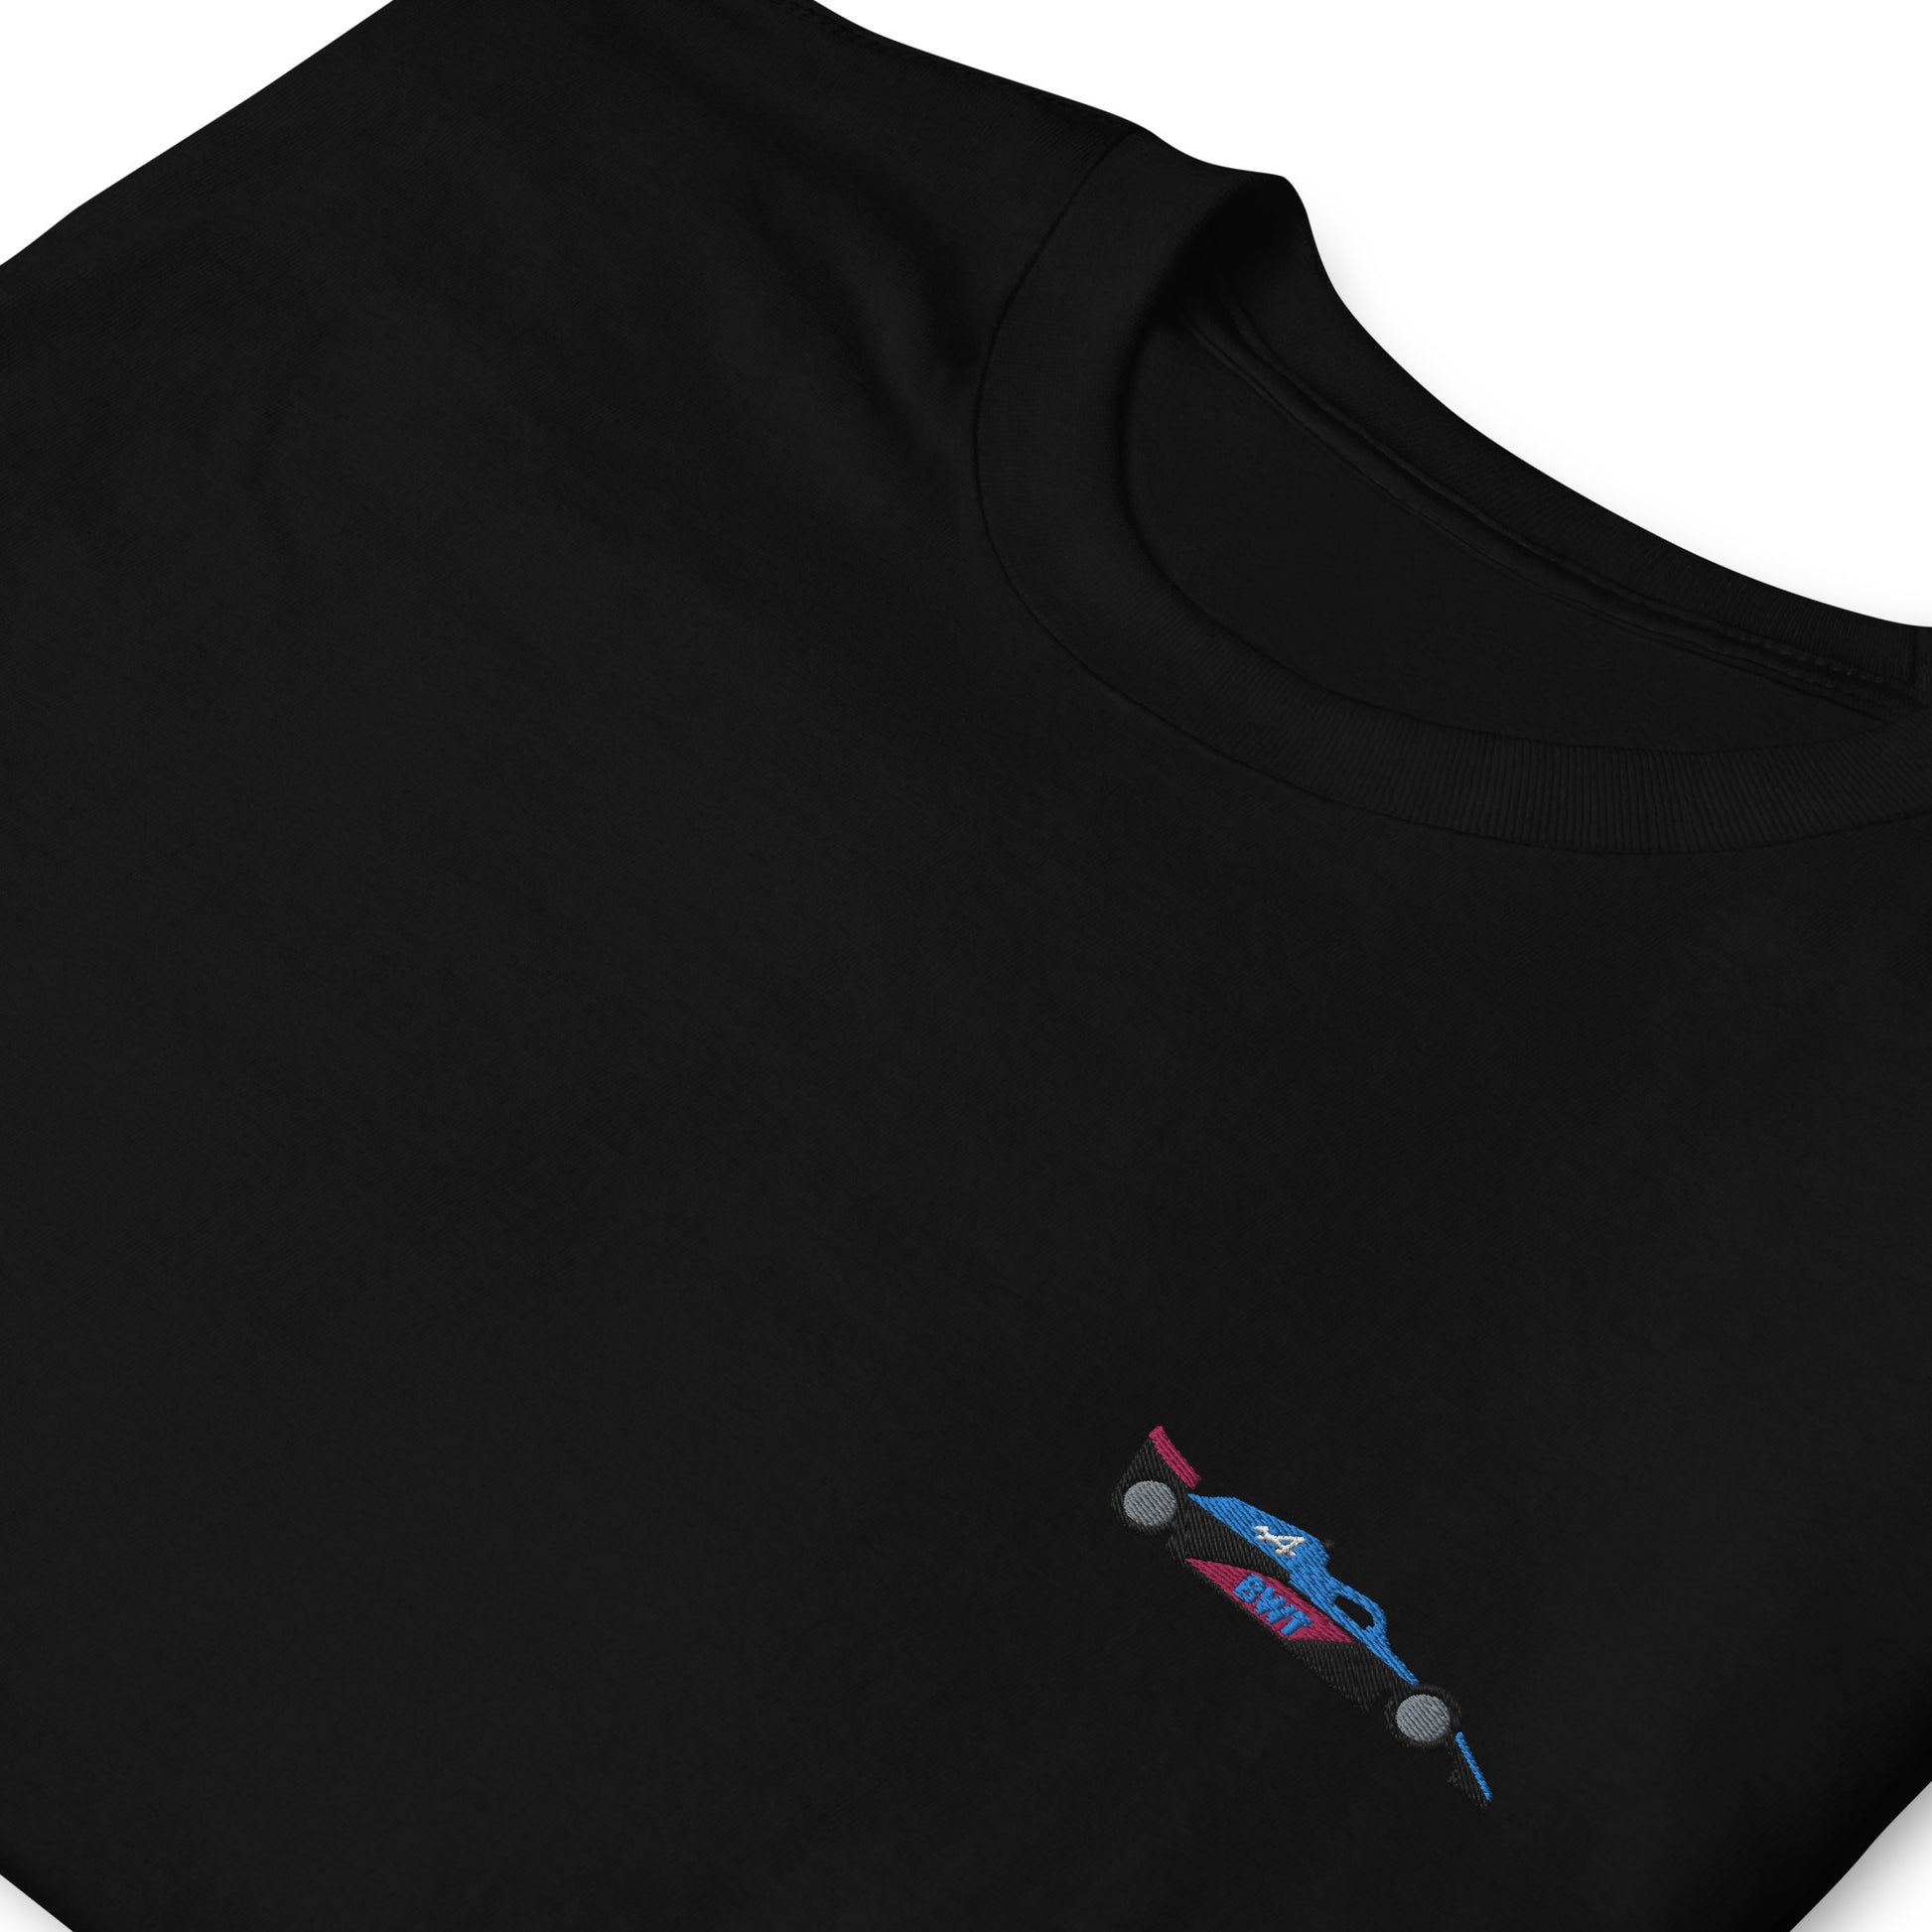 Embroidered Alpine F1 Car Unisex T-Shirt black zoomed in